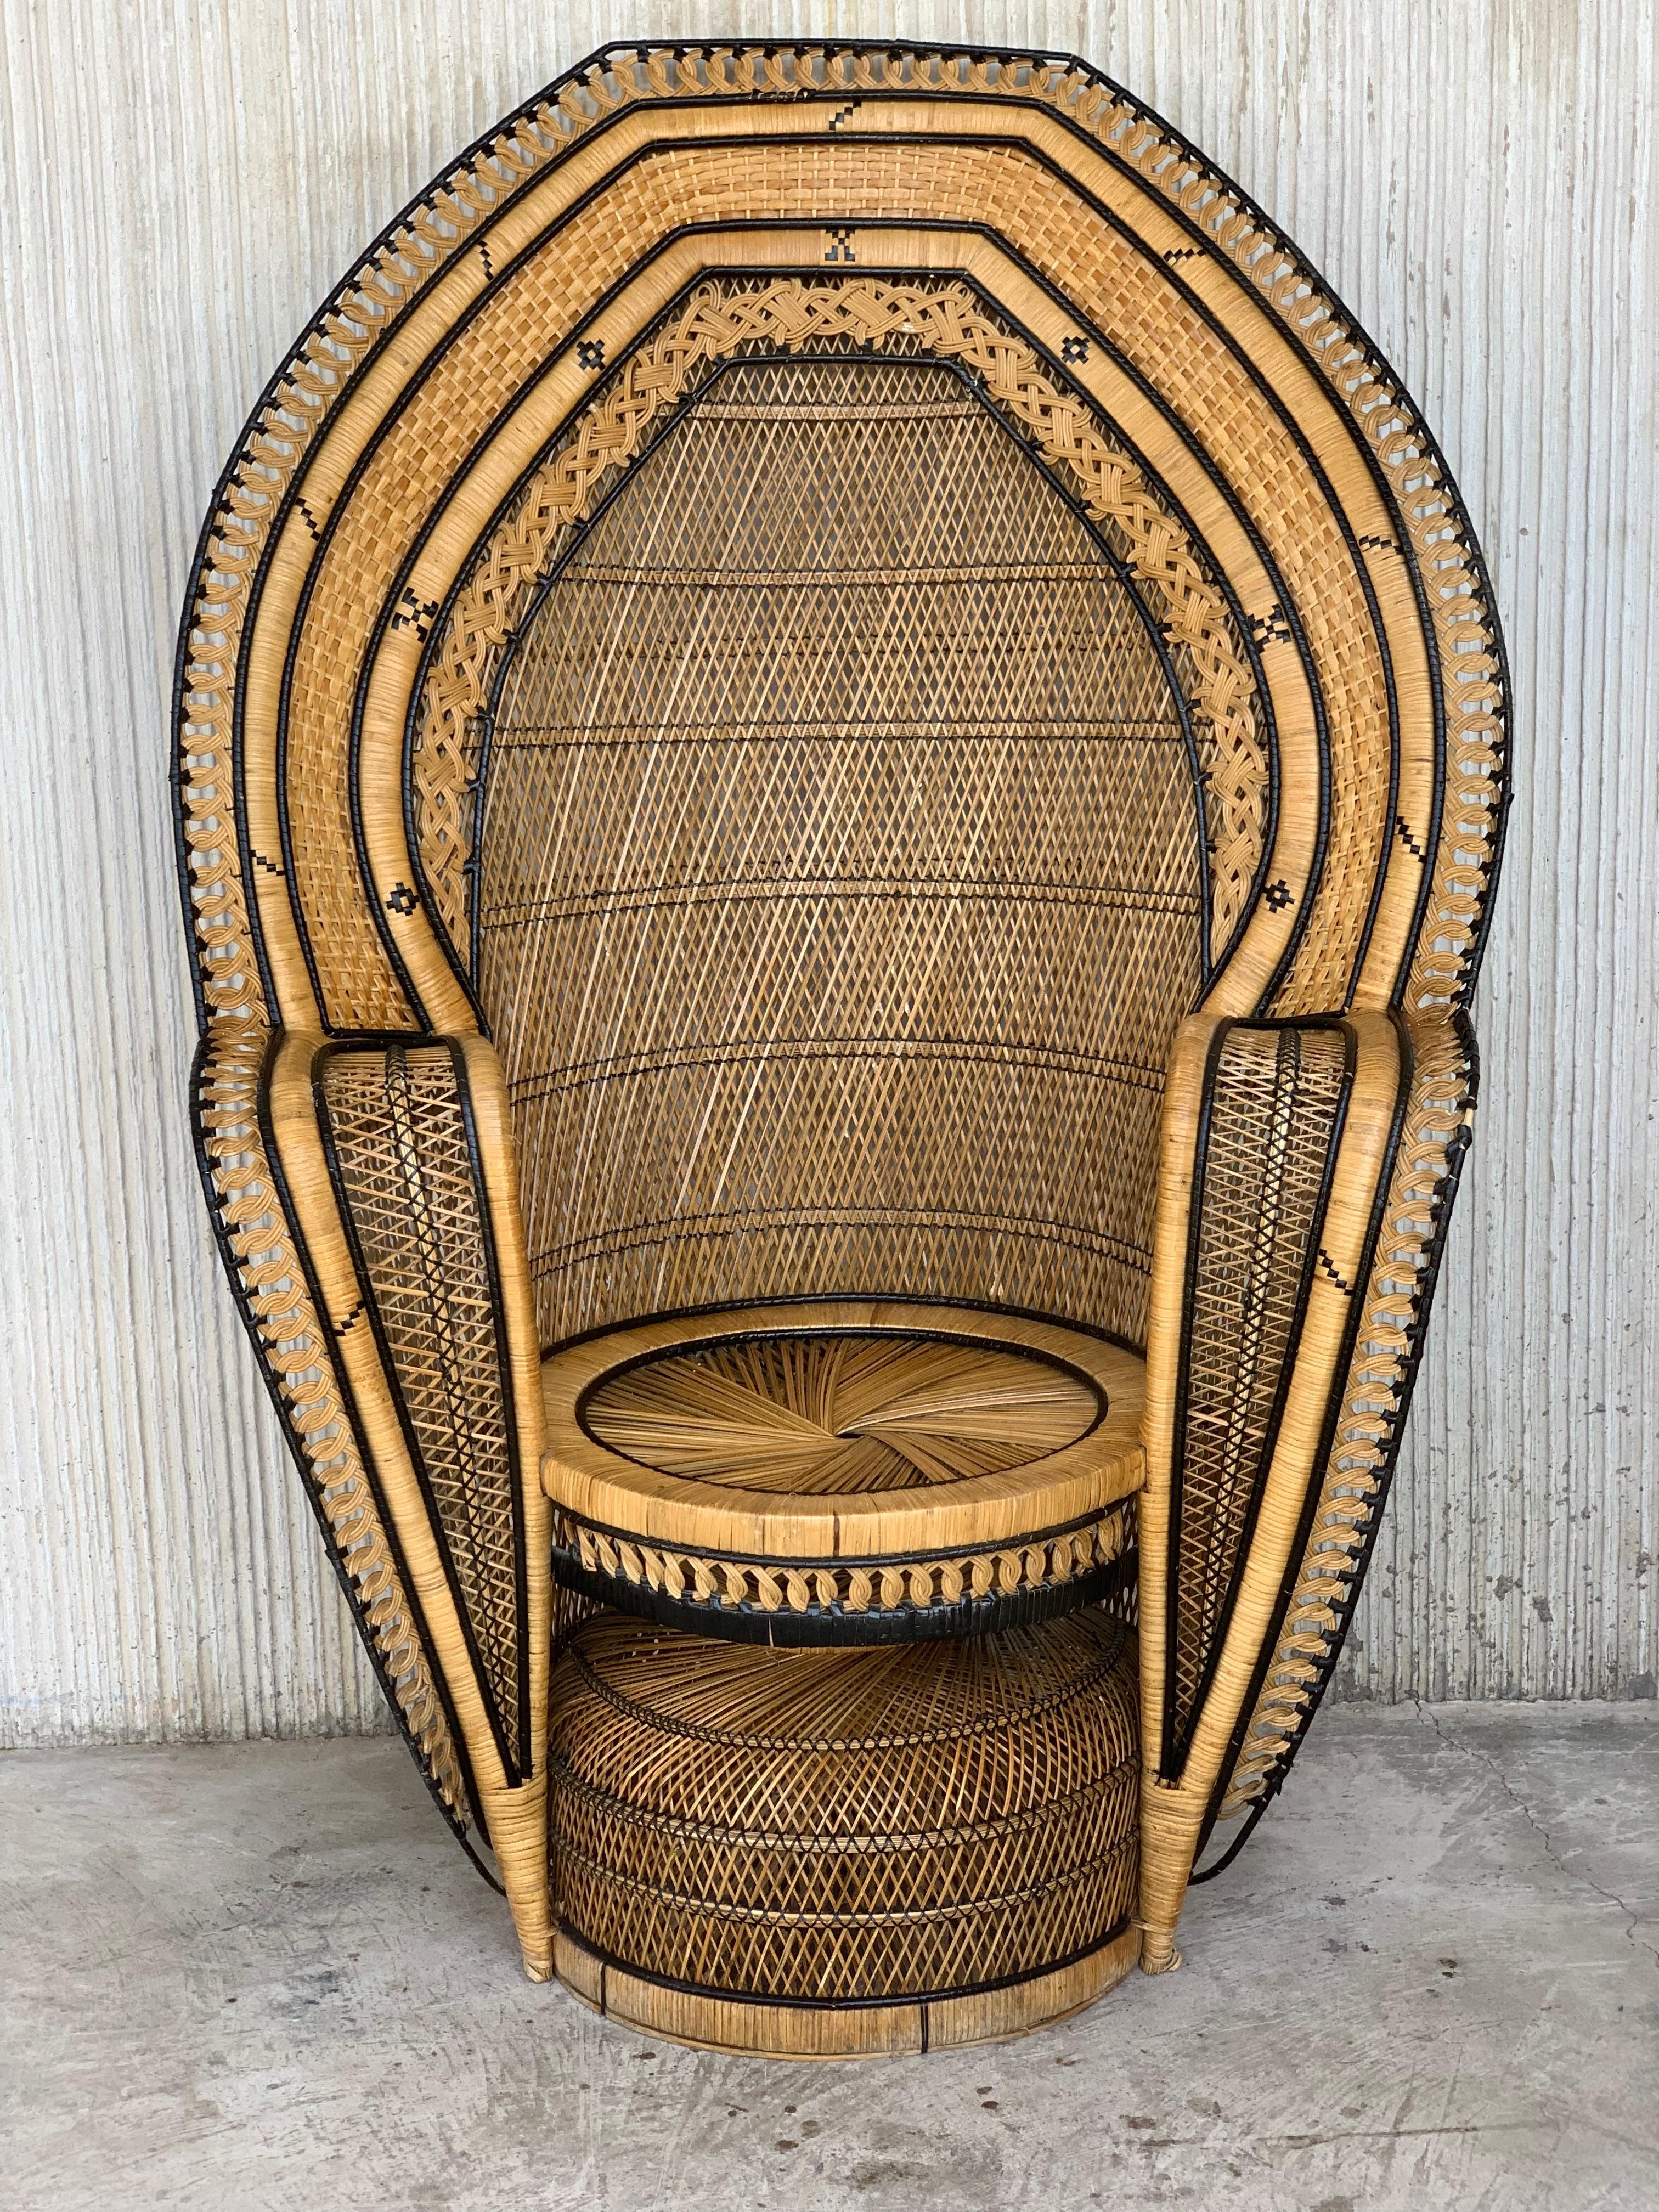 Stunning handwoven vintage peacock chair from the 1970s.
Please note the details and different techniques in this chair. 
Made out of wicker, rattan and reed.
Great for indoor and outdoor use.

Measures: Seat & cushion diameter 21in.